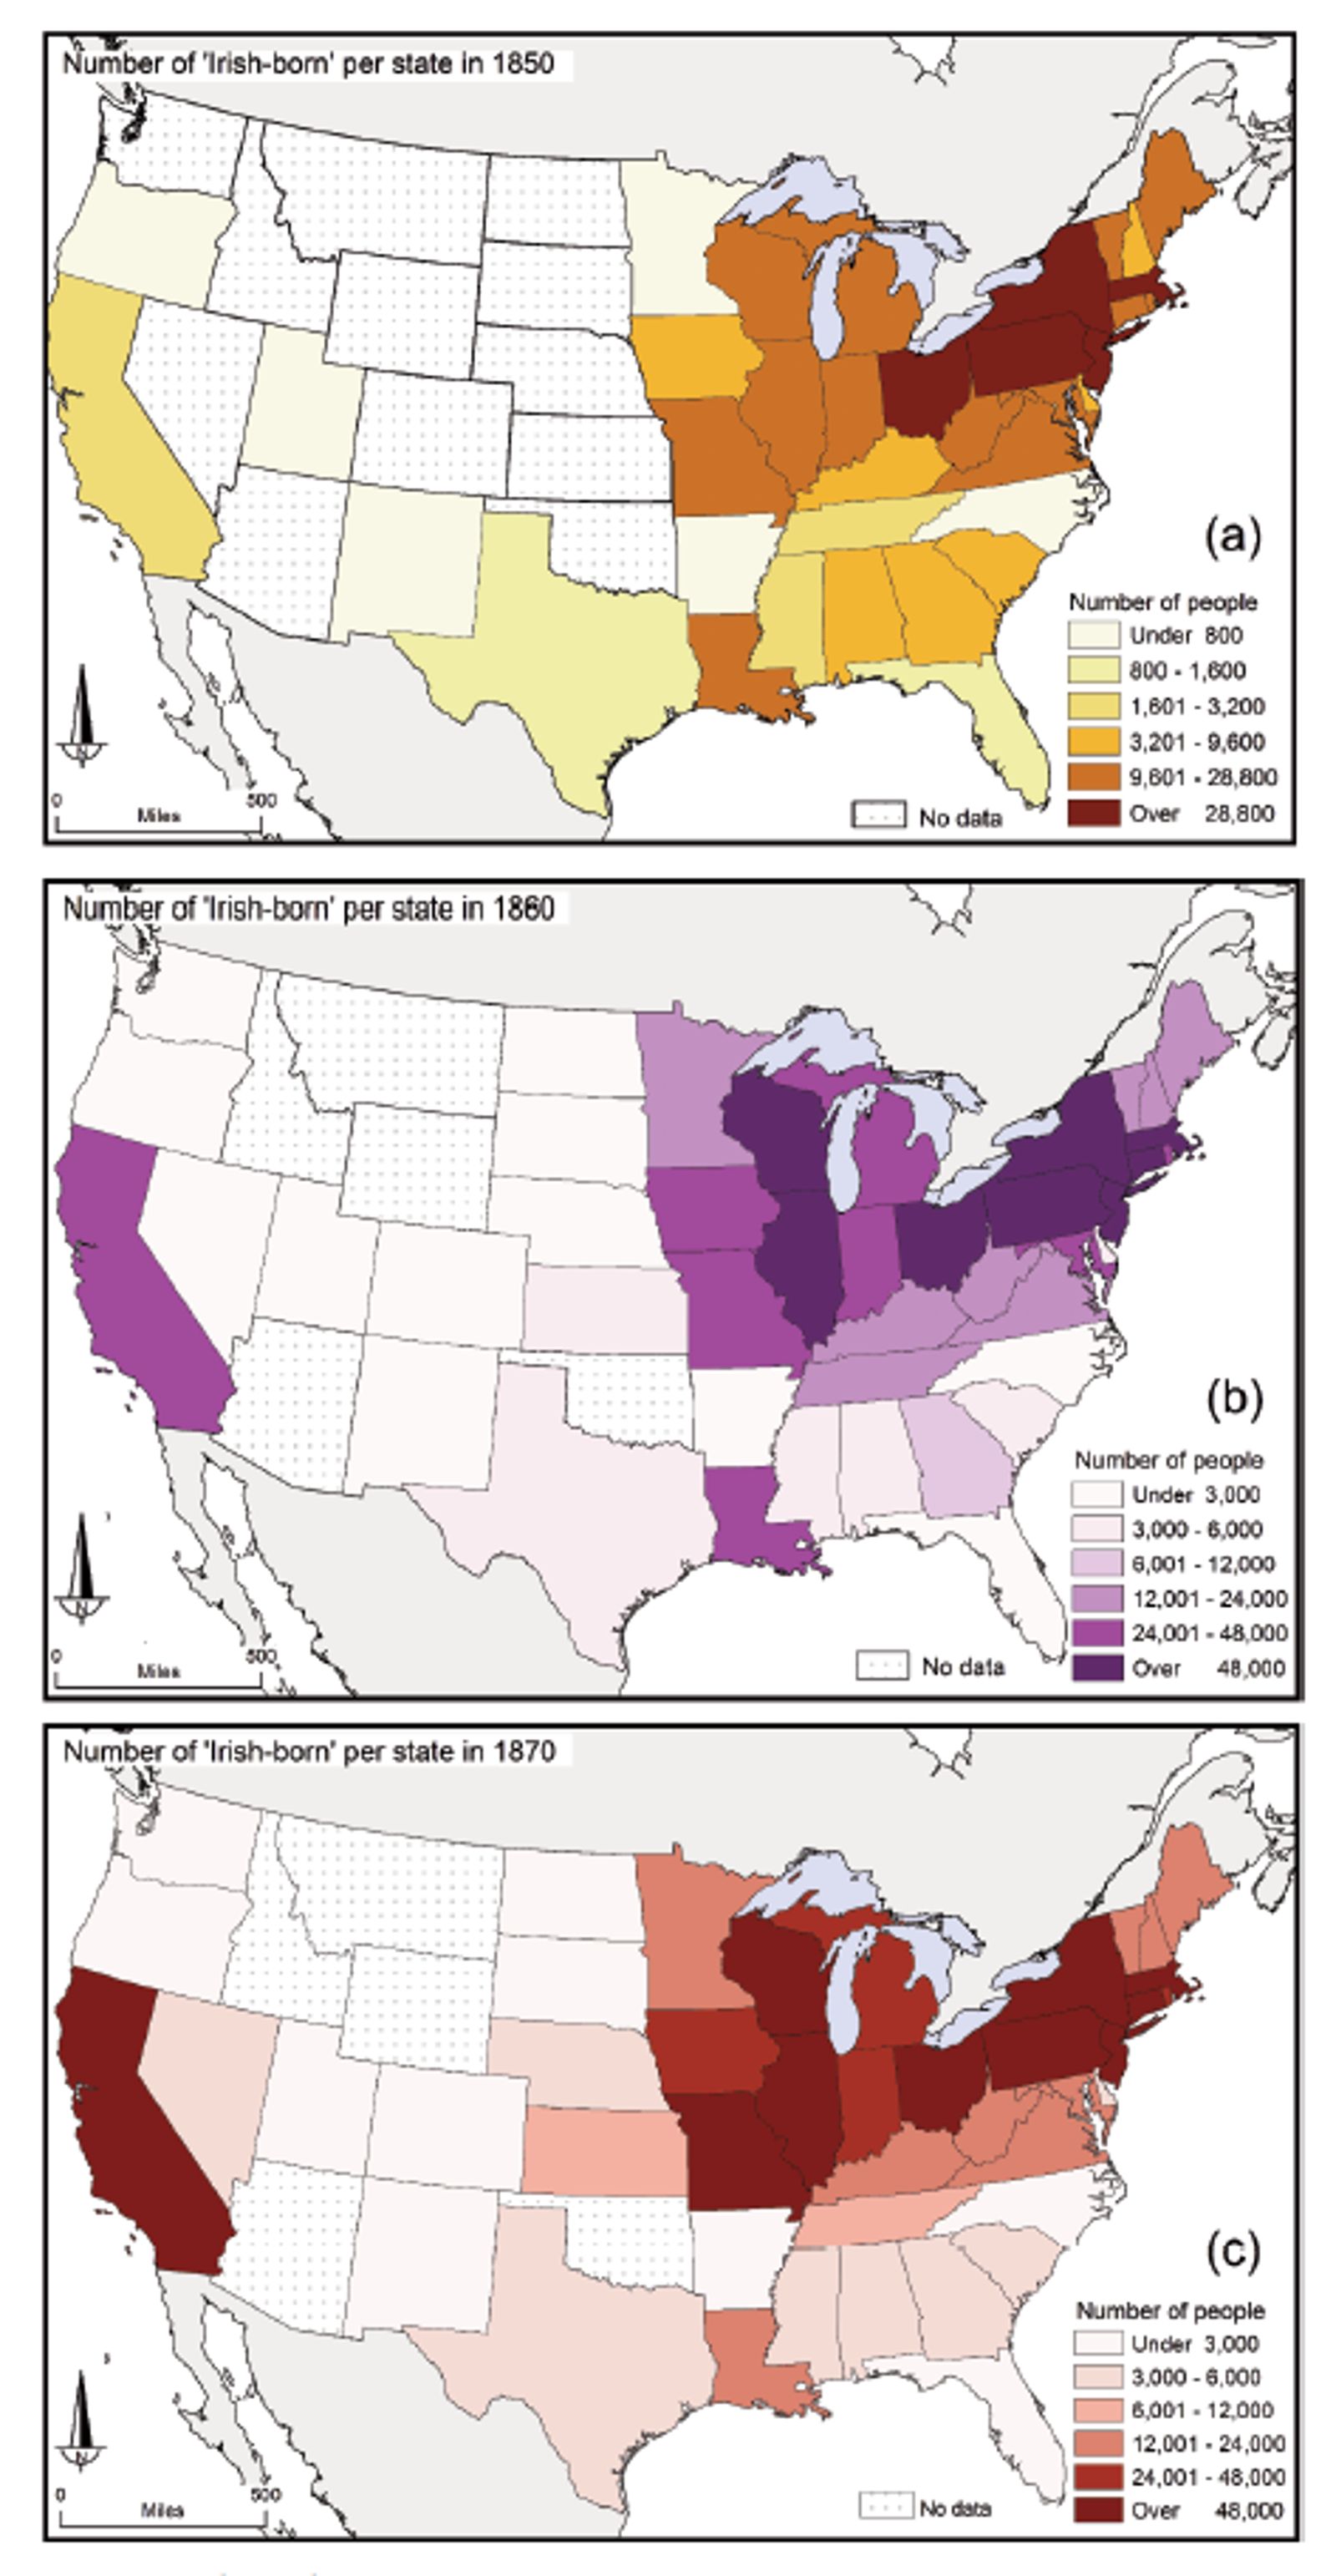 Image - Distribution of Irish immigrants across the United States in 1850, 1860 and 1870